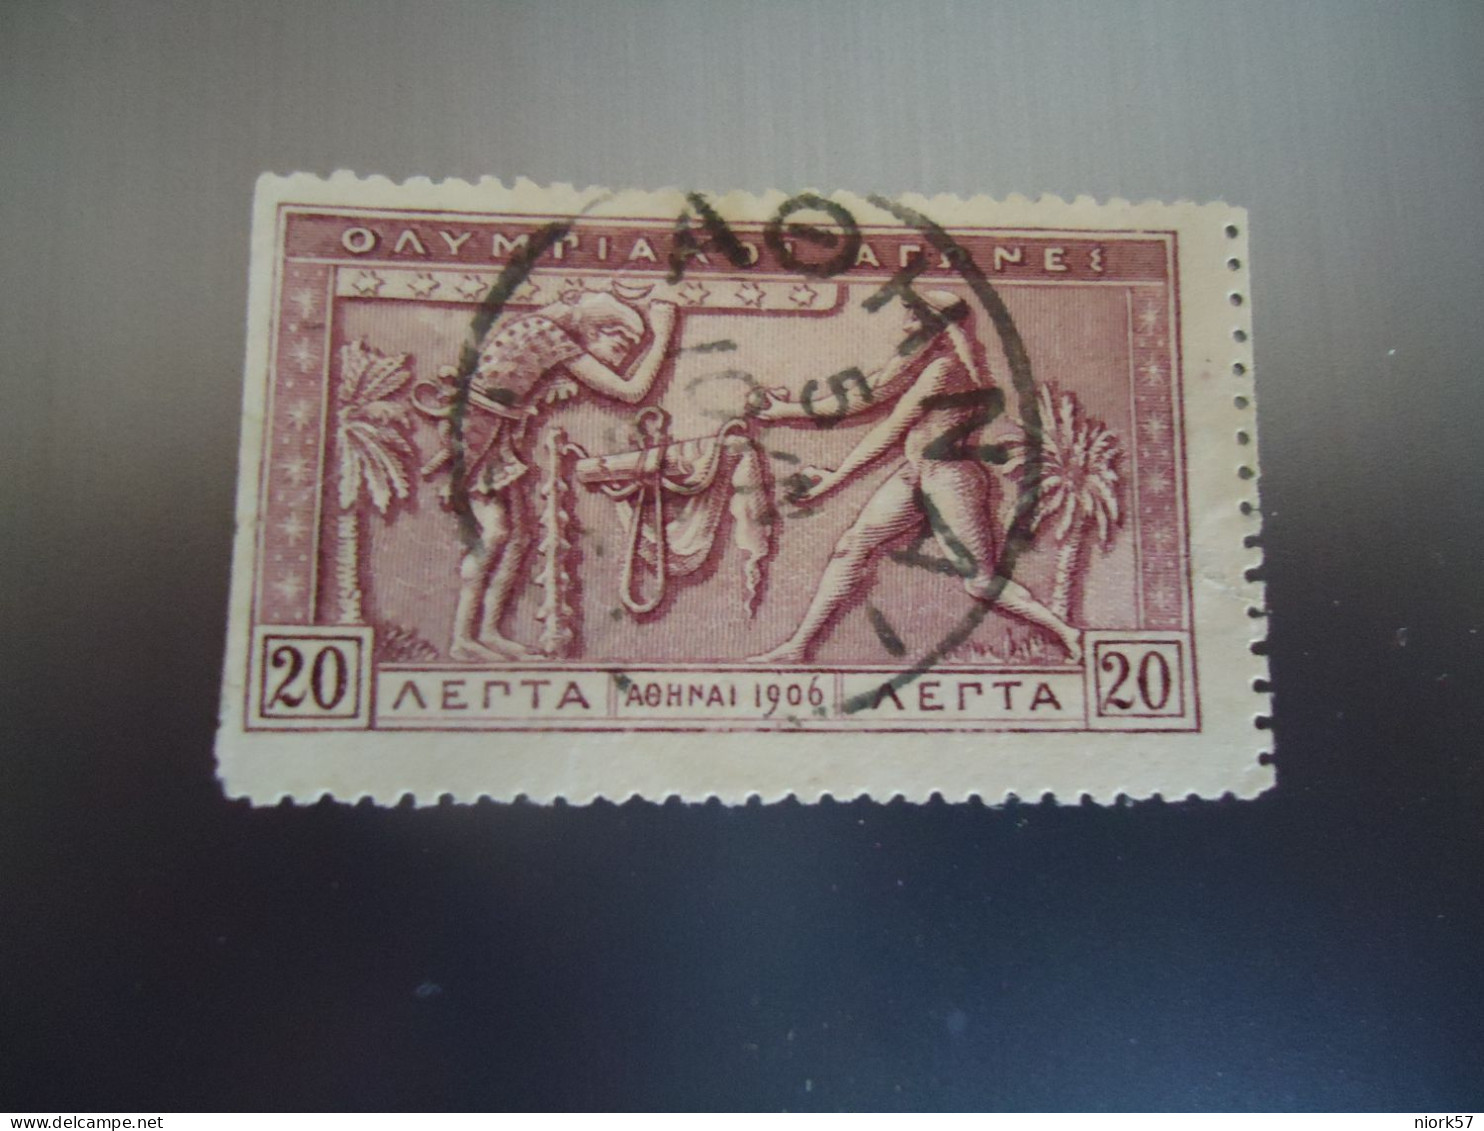 GREECE USED STAMPS OLYMPIC GAMES 1906   POSΤMARK  ΑΘΗΝΑ - Postmarks - EMA (Printer Machine)